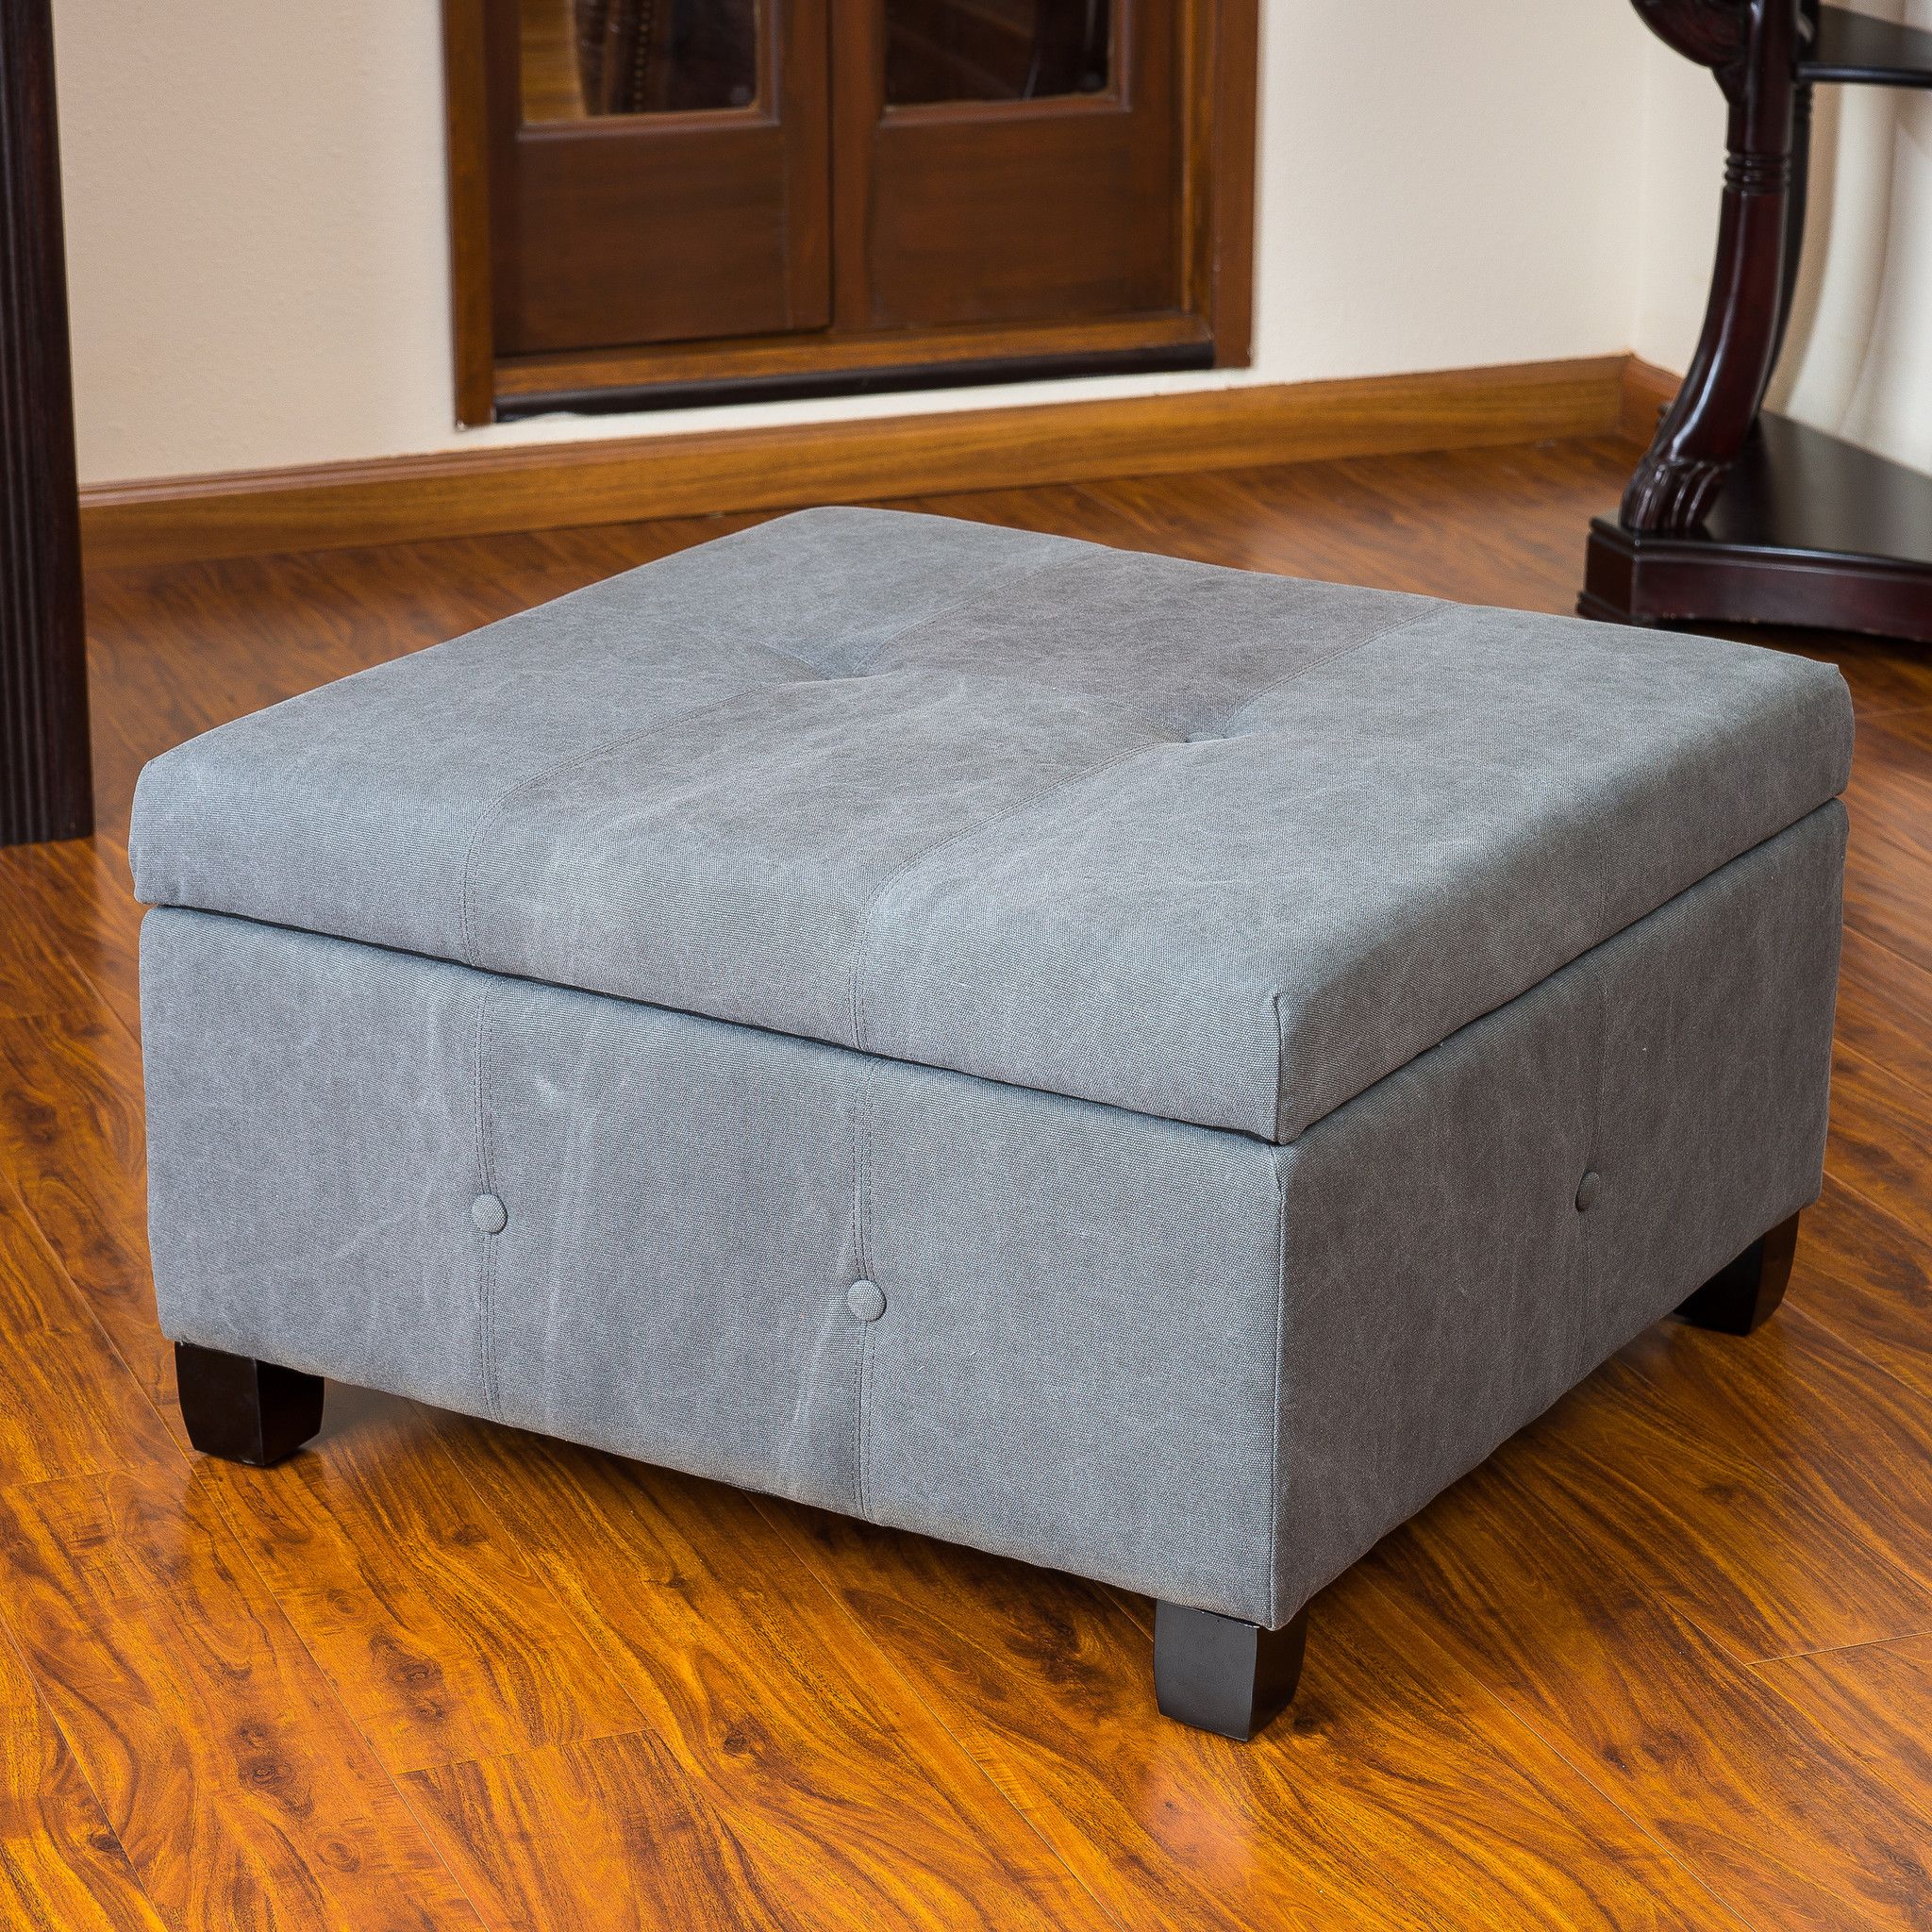 Ottoman Coffee Table Fabric Also Glass Material Increases The Space Of All Rooms (View 2 of 9)